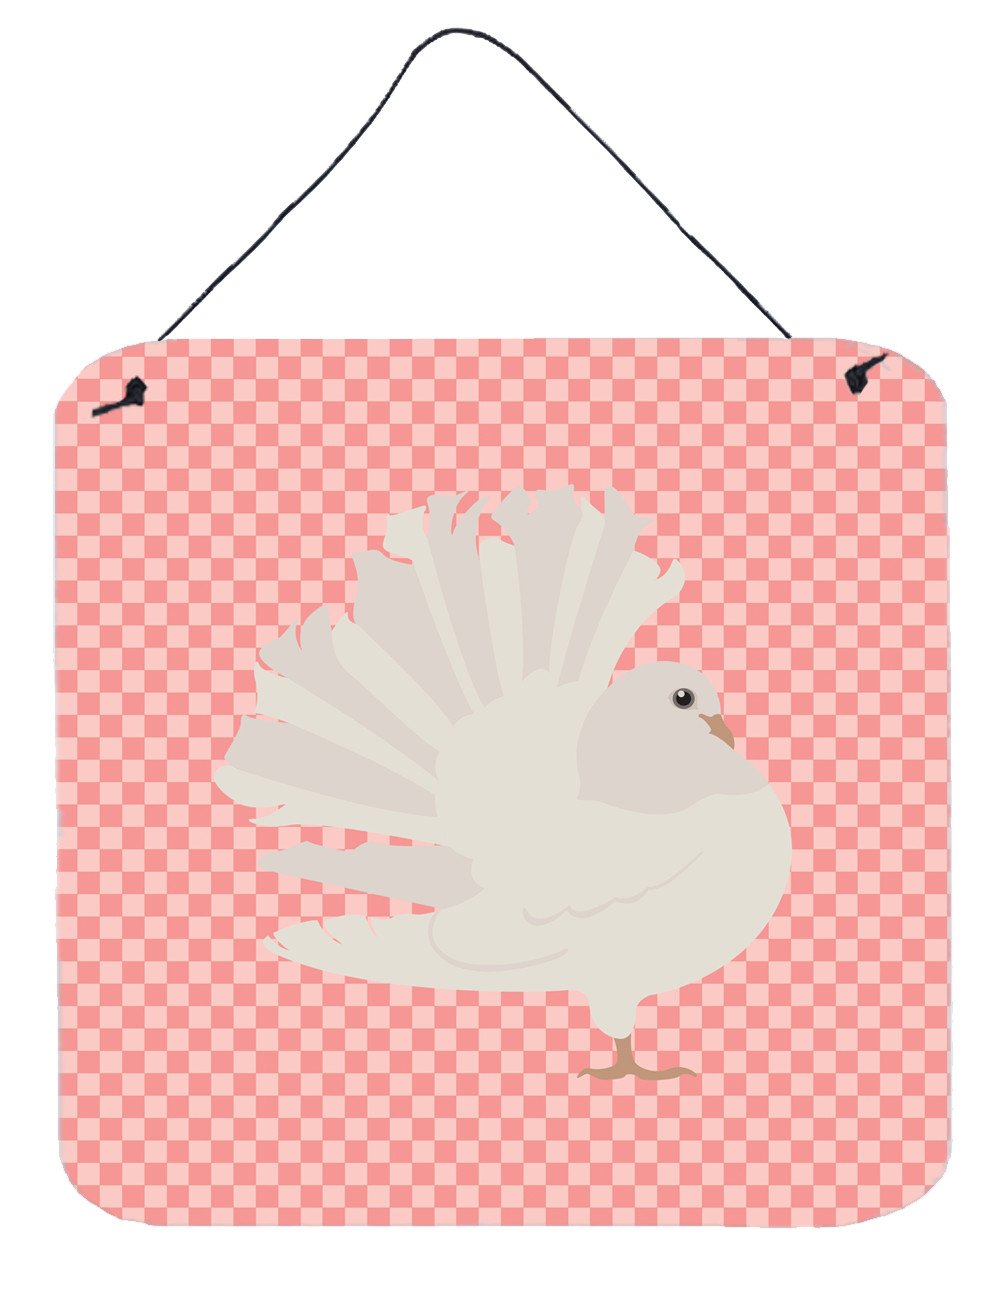 Silver Fantail Pigeon Pink Check Wall or Door Hanging Prints BB7950DS66 by Caroline's Treasures